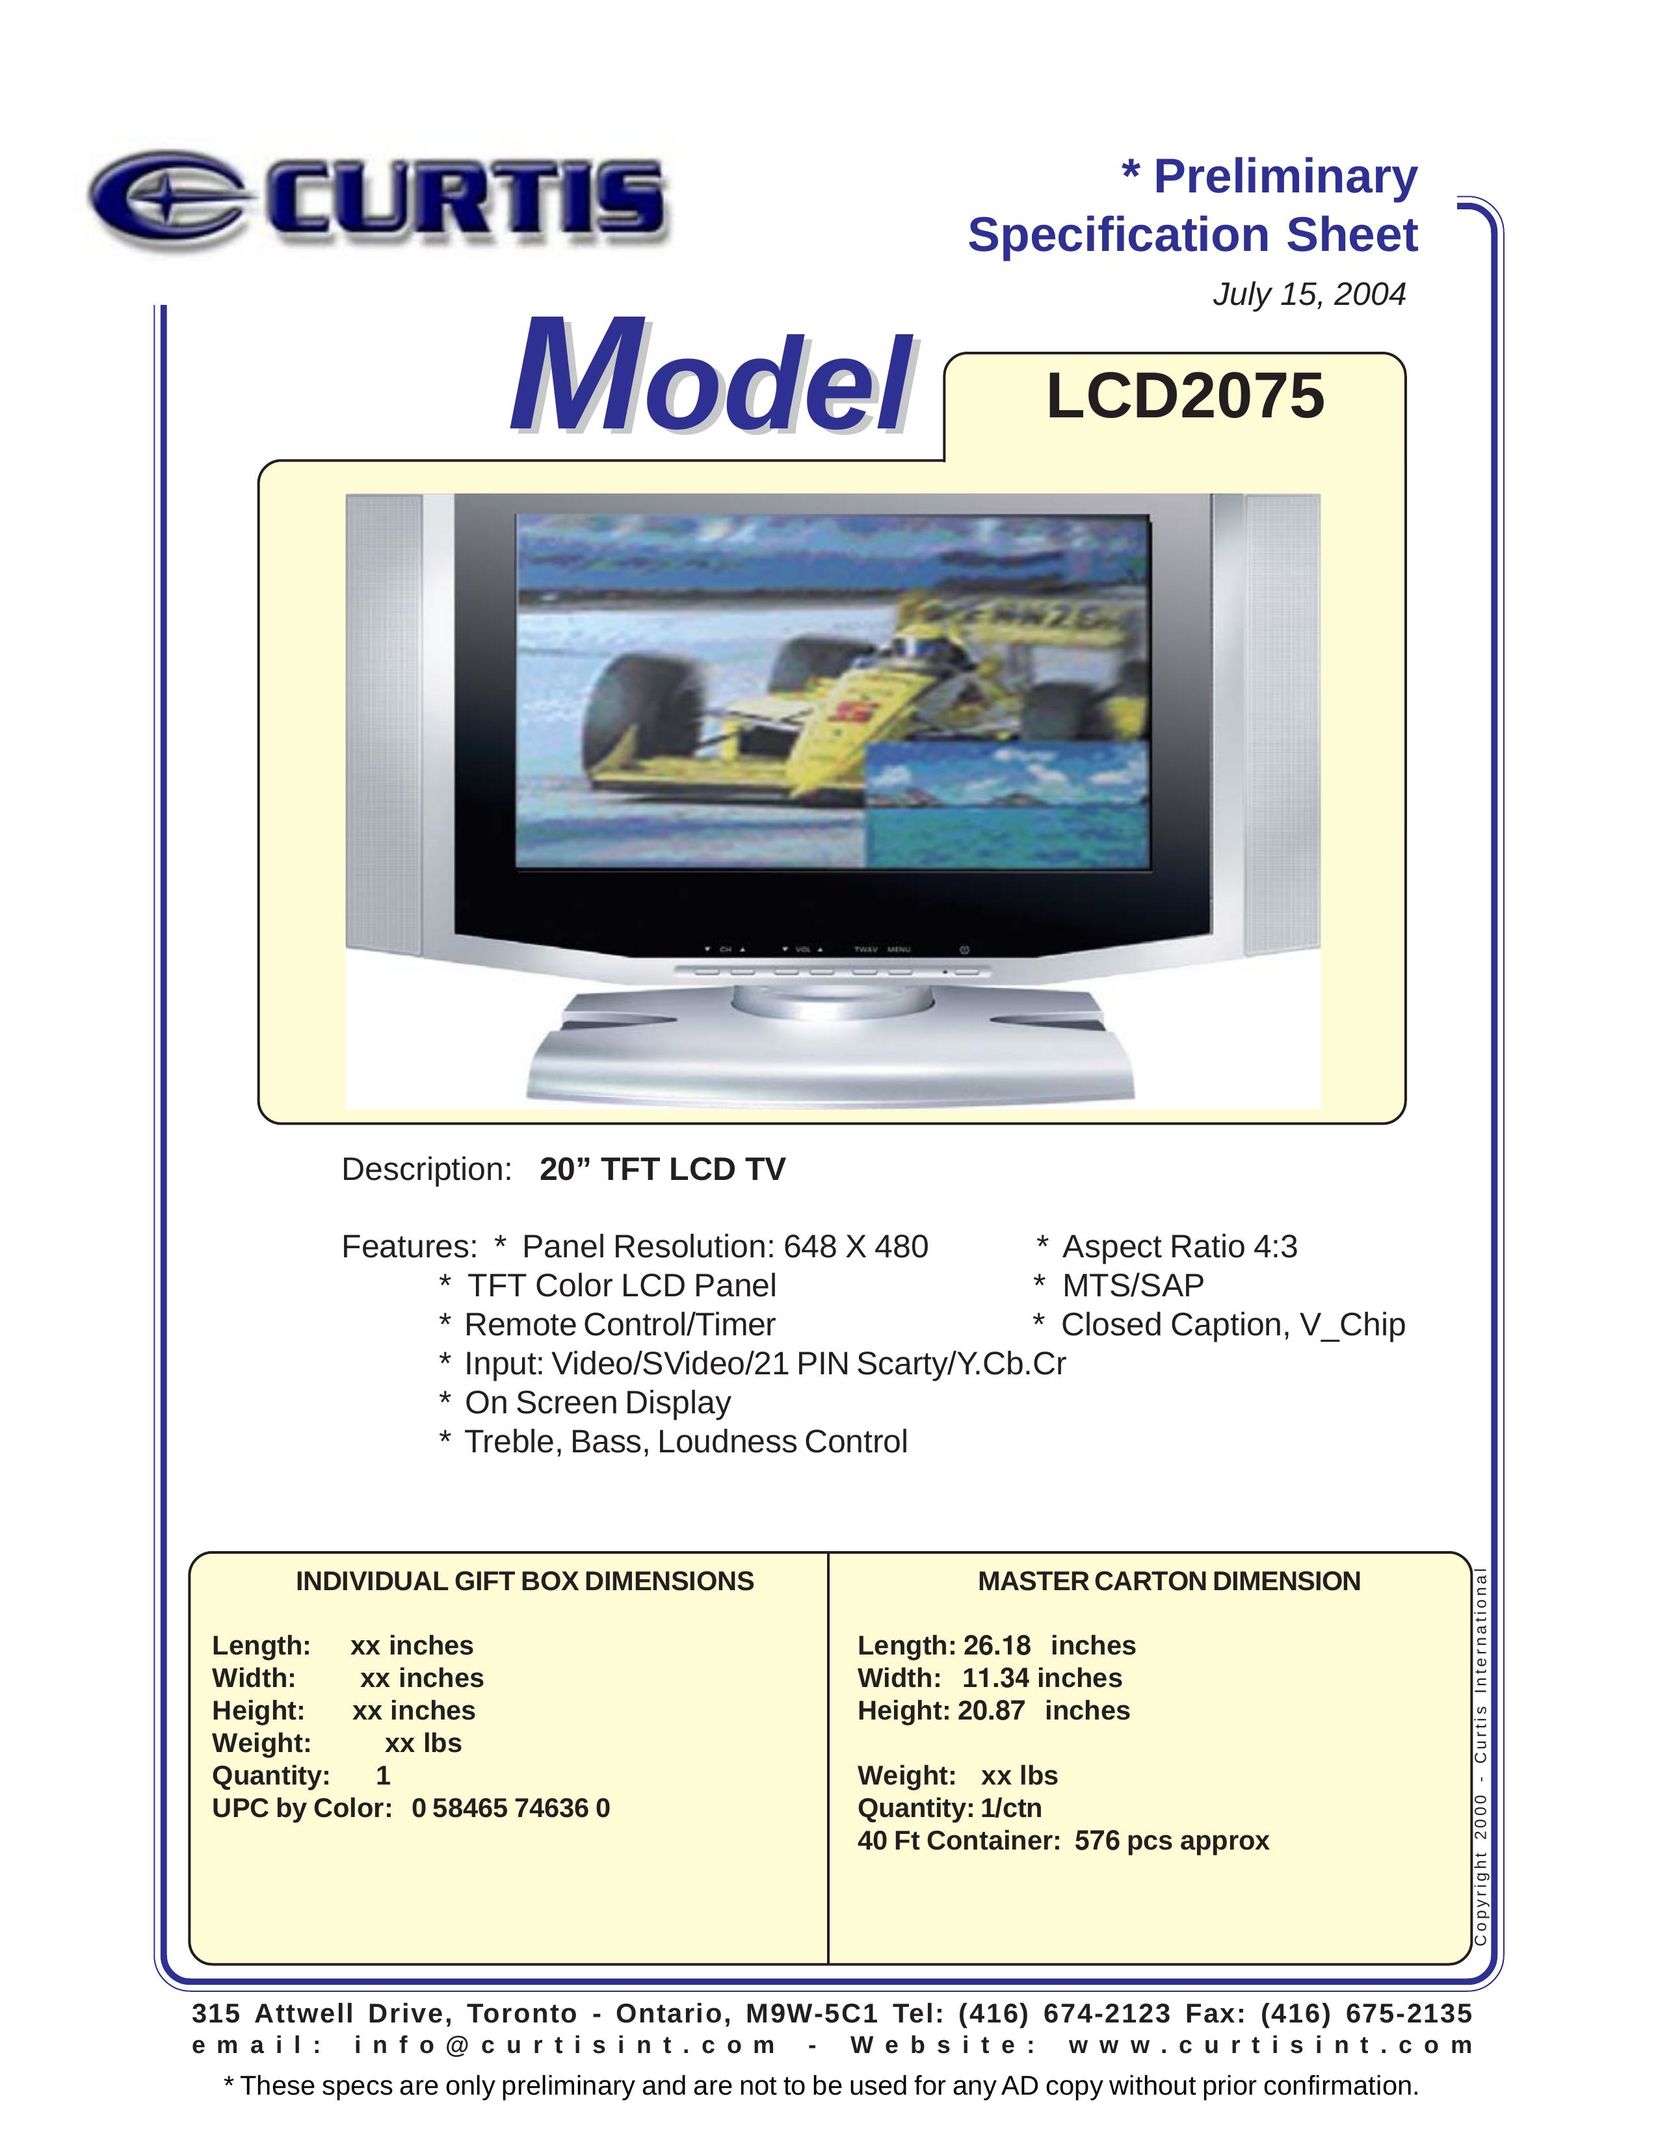 Curtis LCD2075 Flat Panel Television User Manual